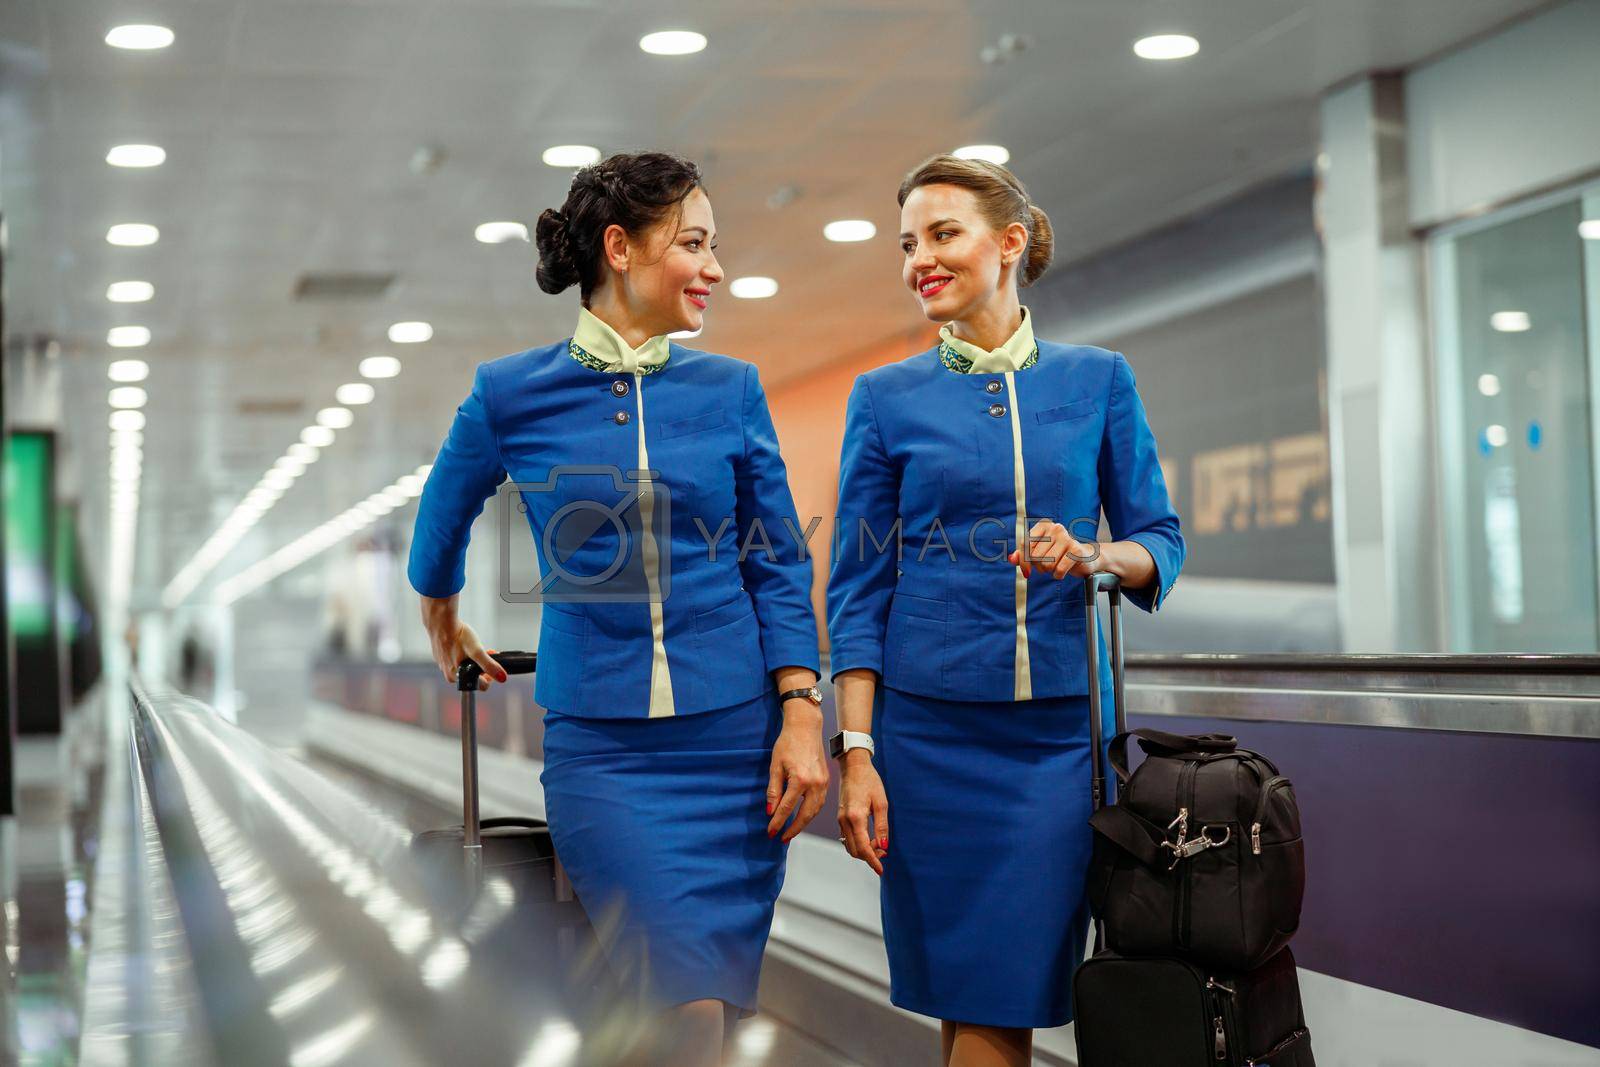 Joyful female flight attendants in air hostess uniform looking at each other and smiling while waiting for airplane